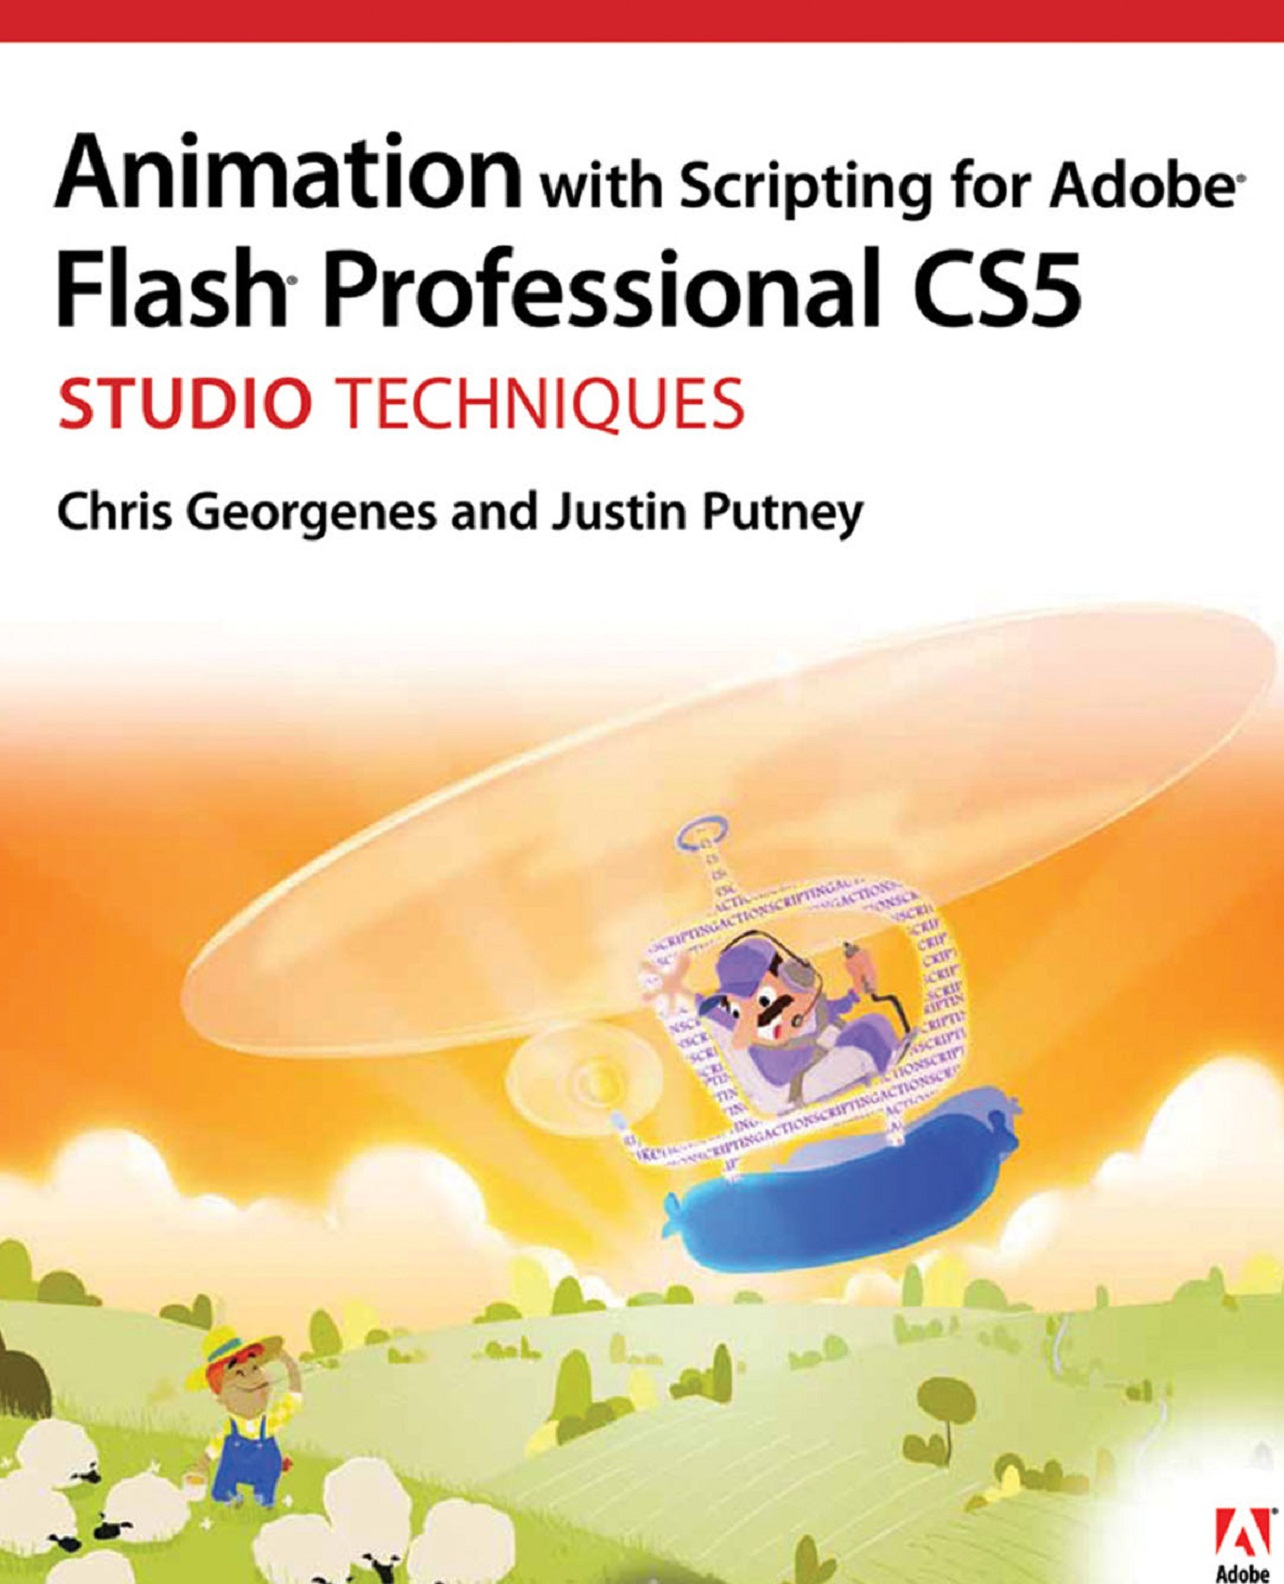 [EBOOK]Animation with Scripting for Adobe Flash Professional CS5